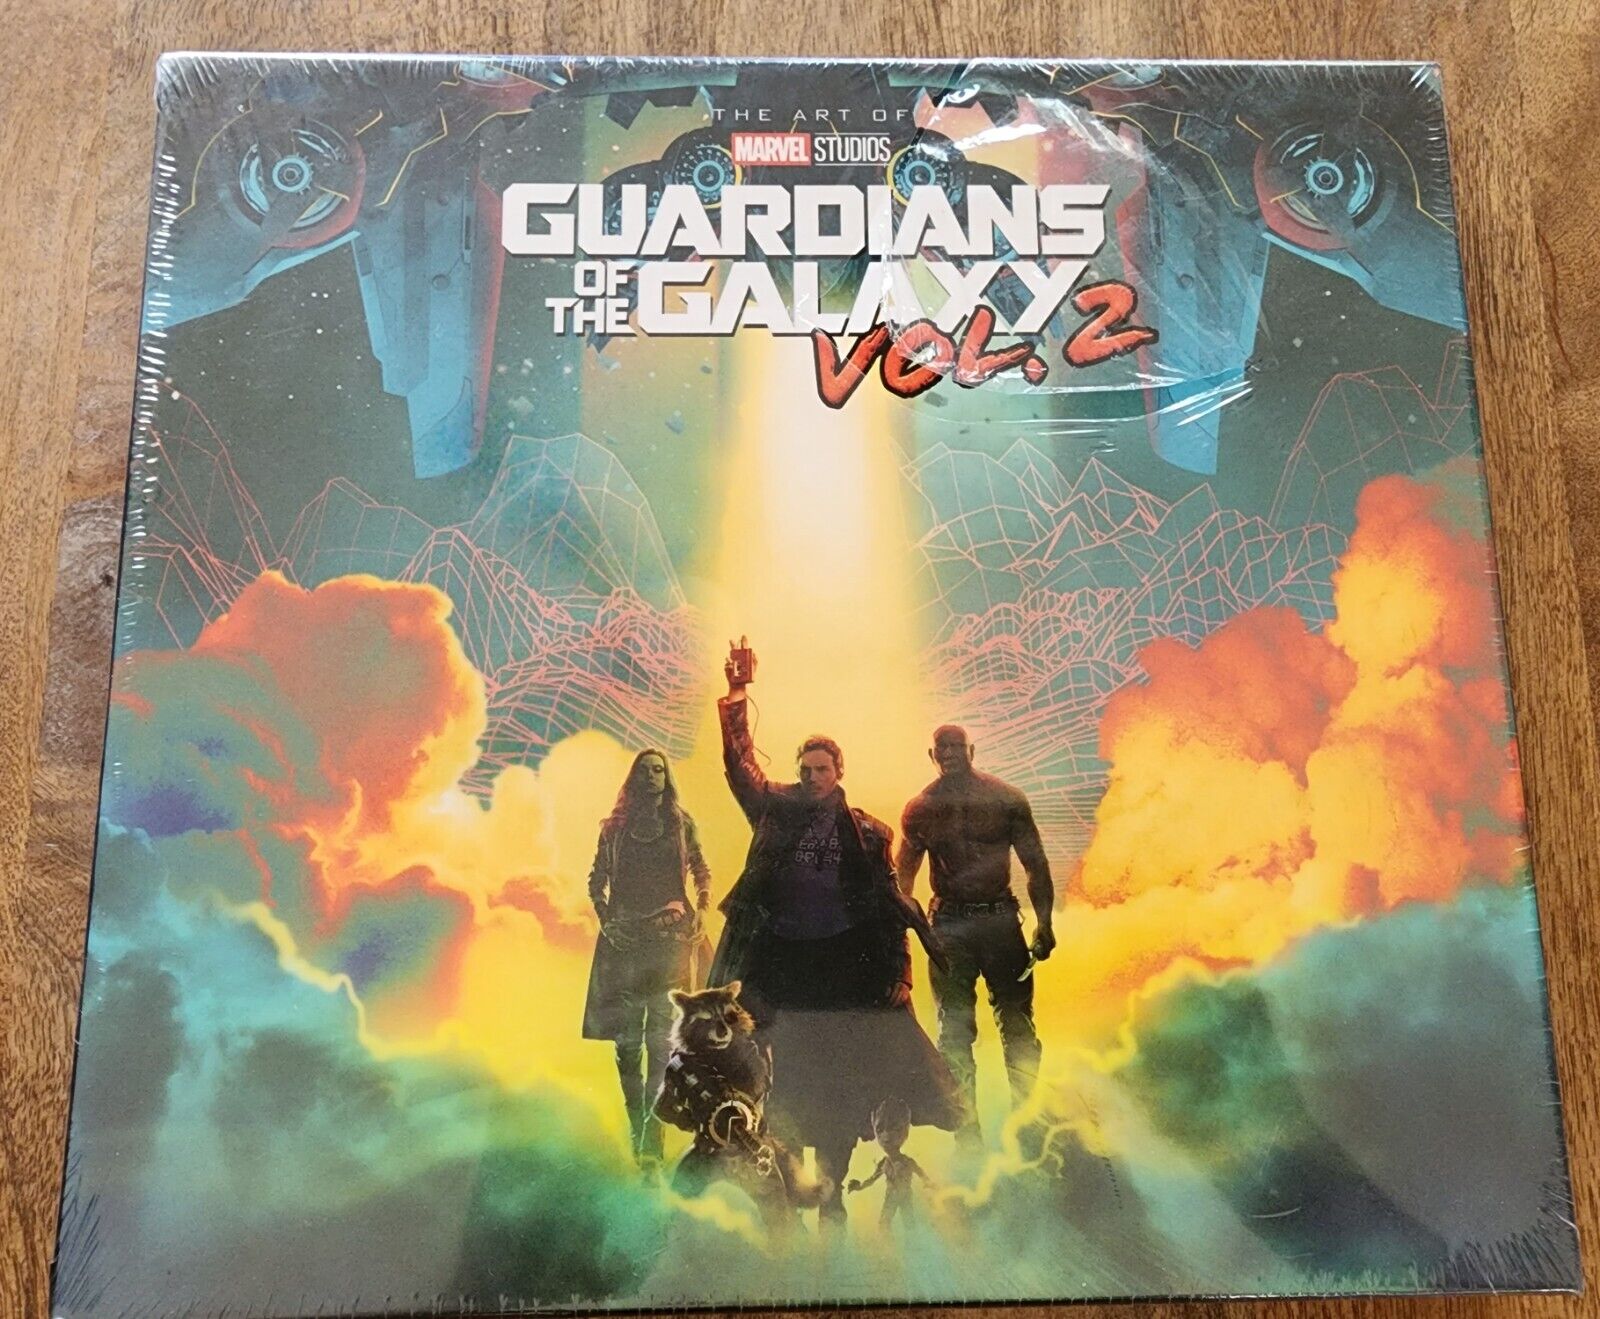 Marvel's Guardians of the Galaxy Vol. 2: the Art of the Movie by Jacob Johnston